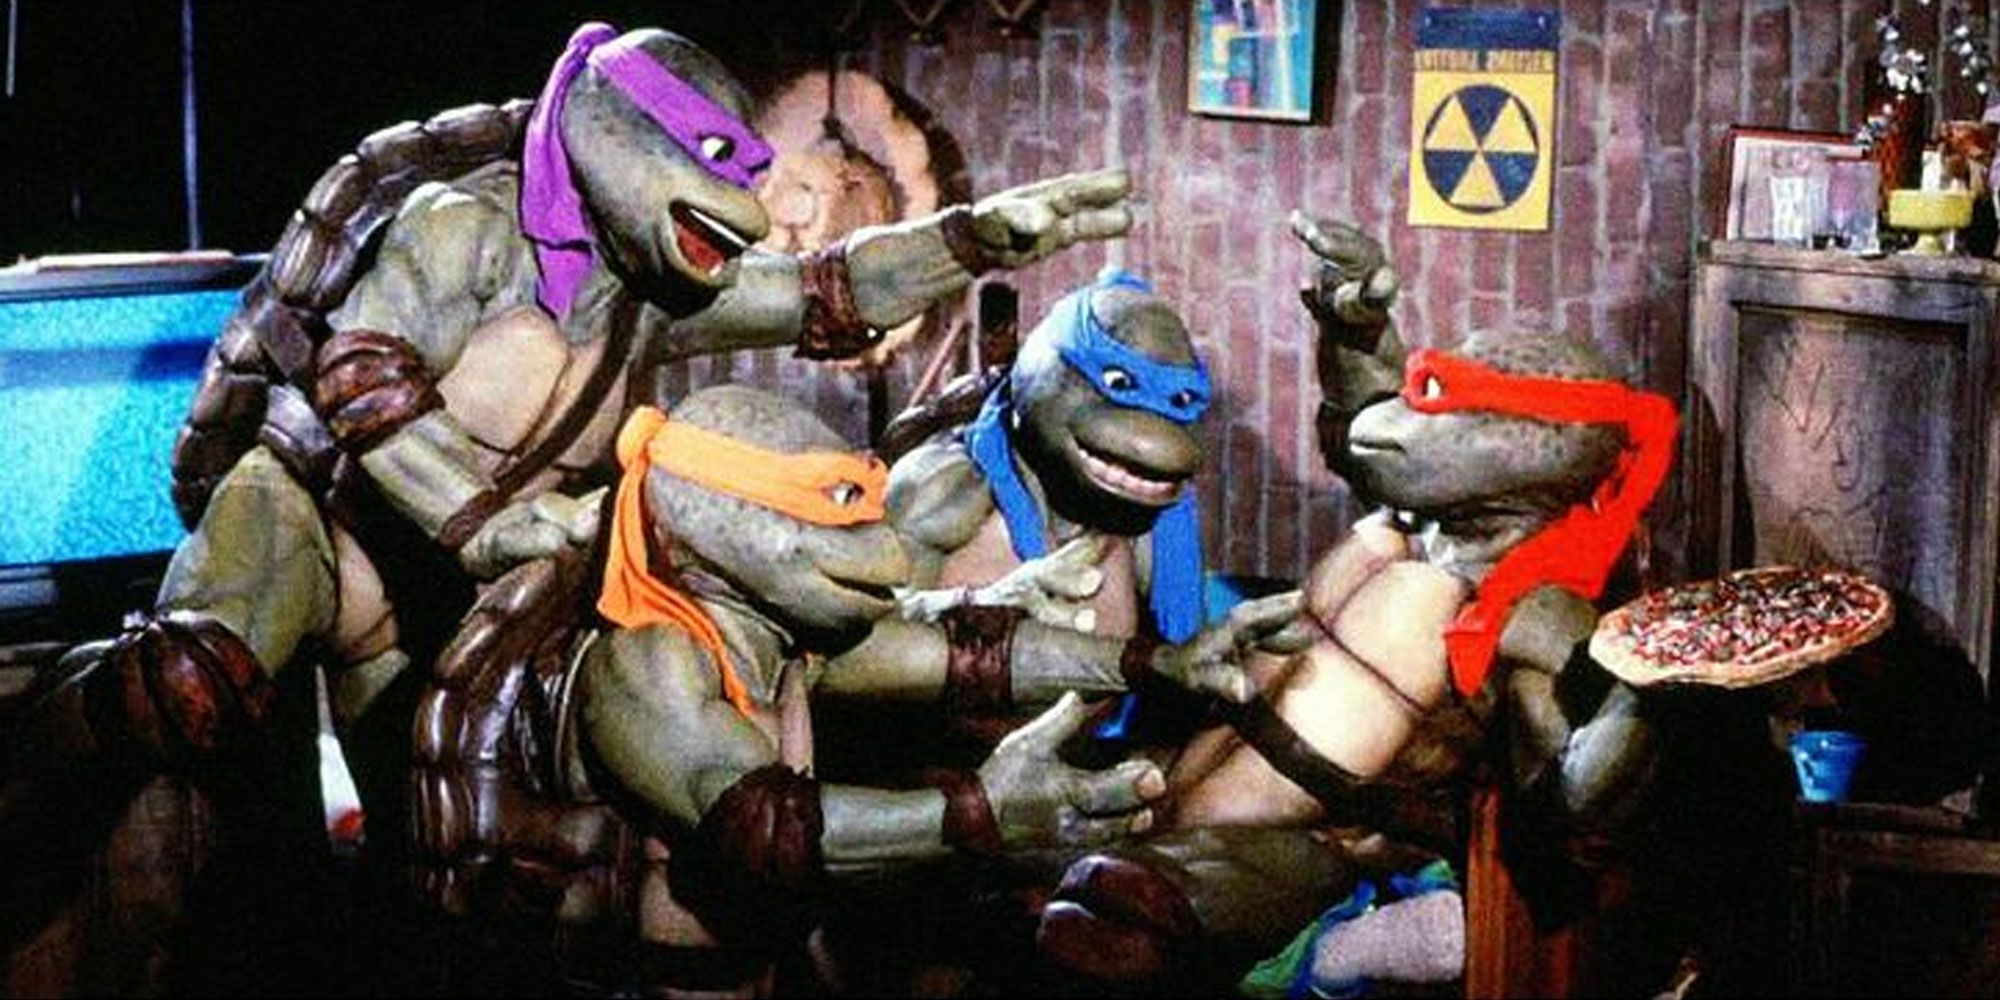 Raphael holds a pizza just out of reach from his brothers in the 90s Teenage Mutant Ninja Tutles live action movie